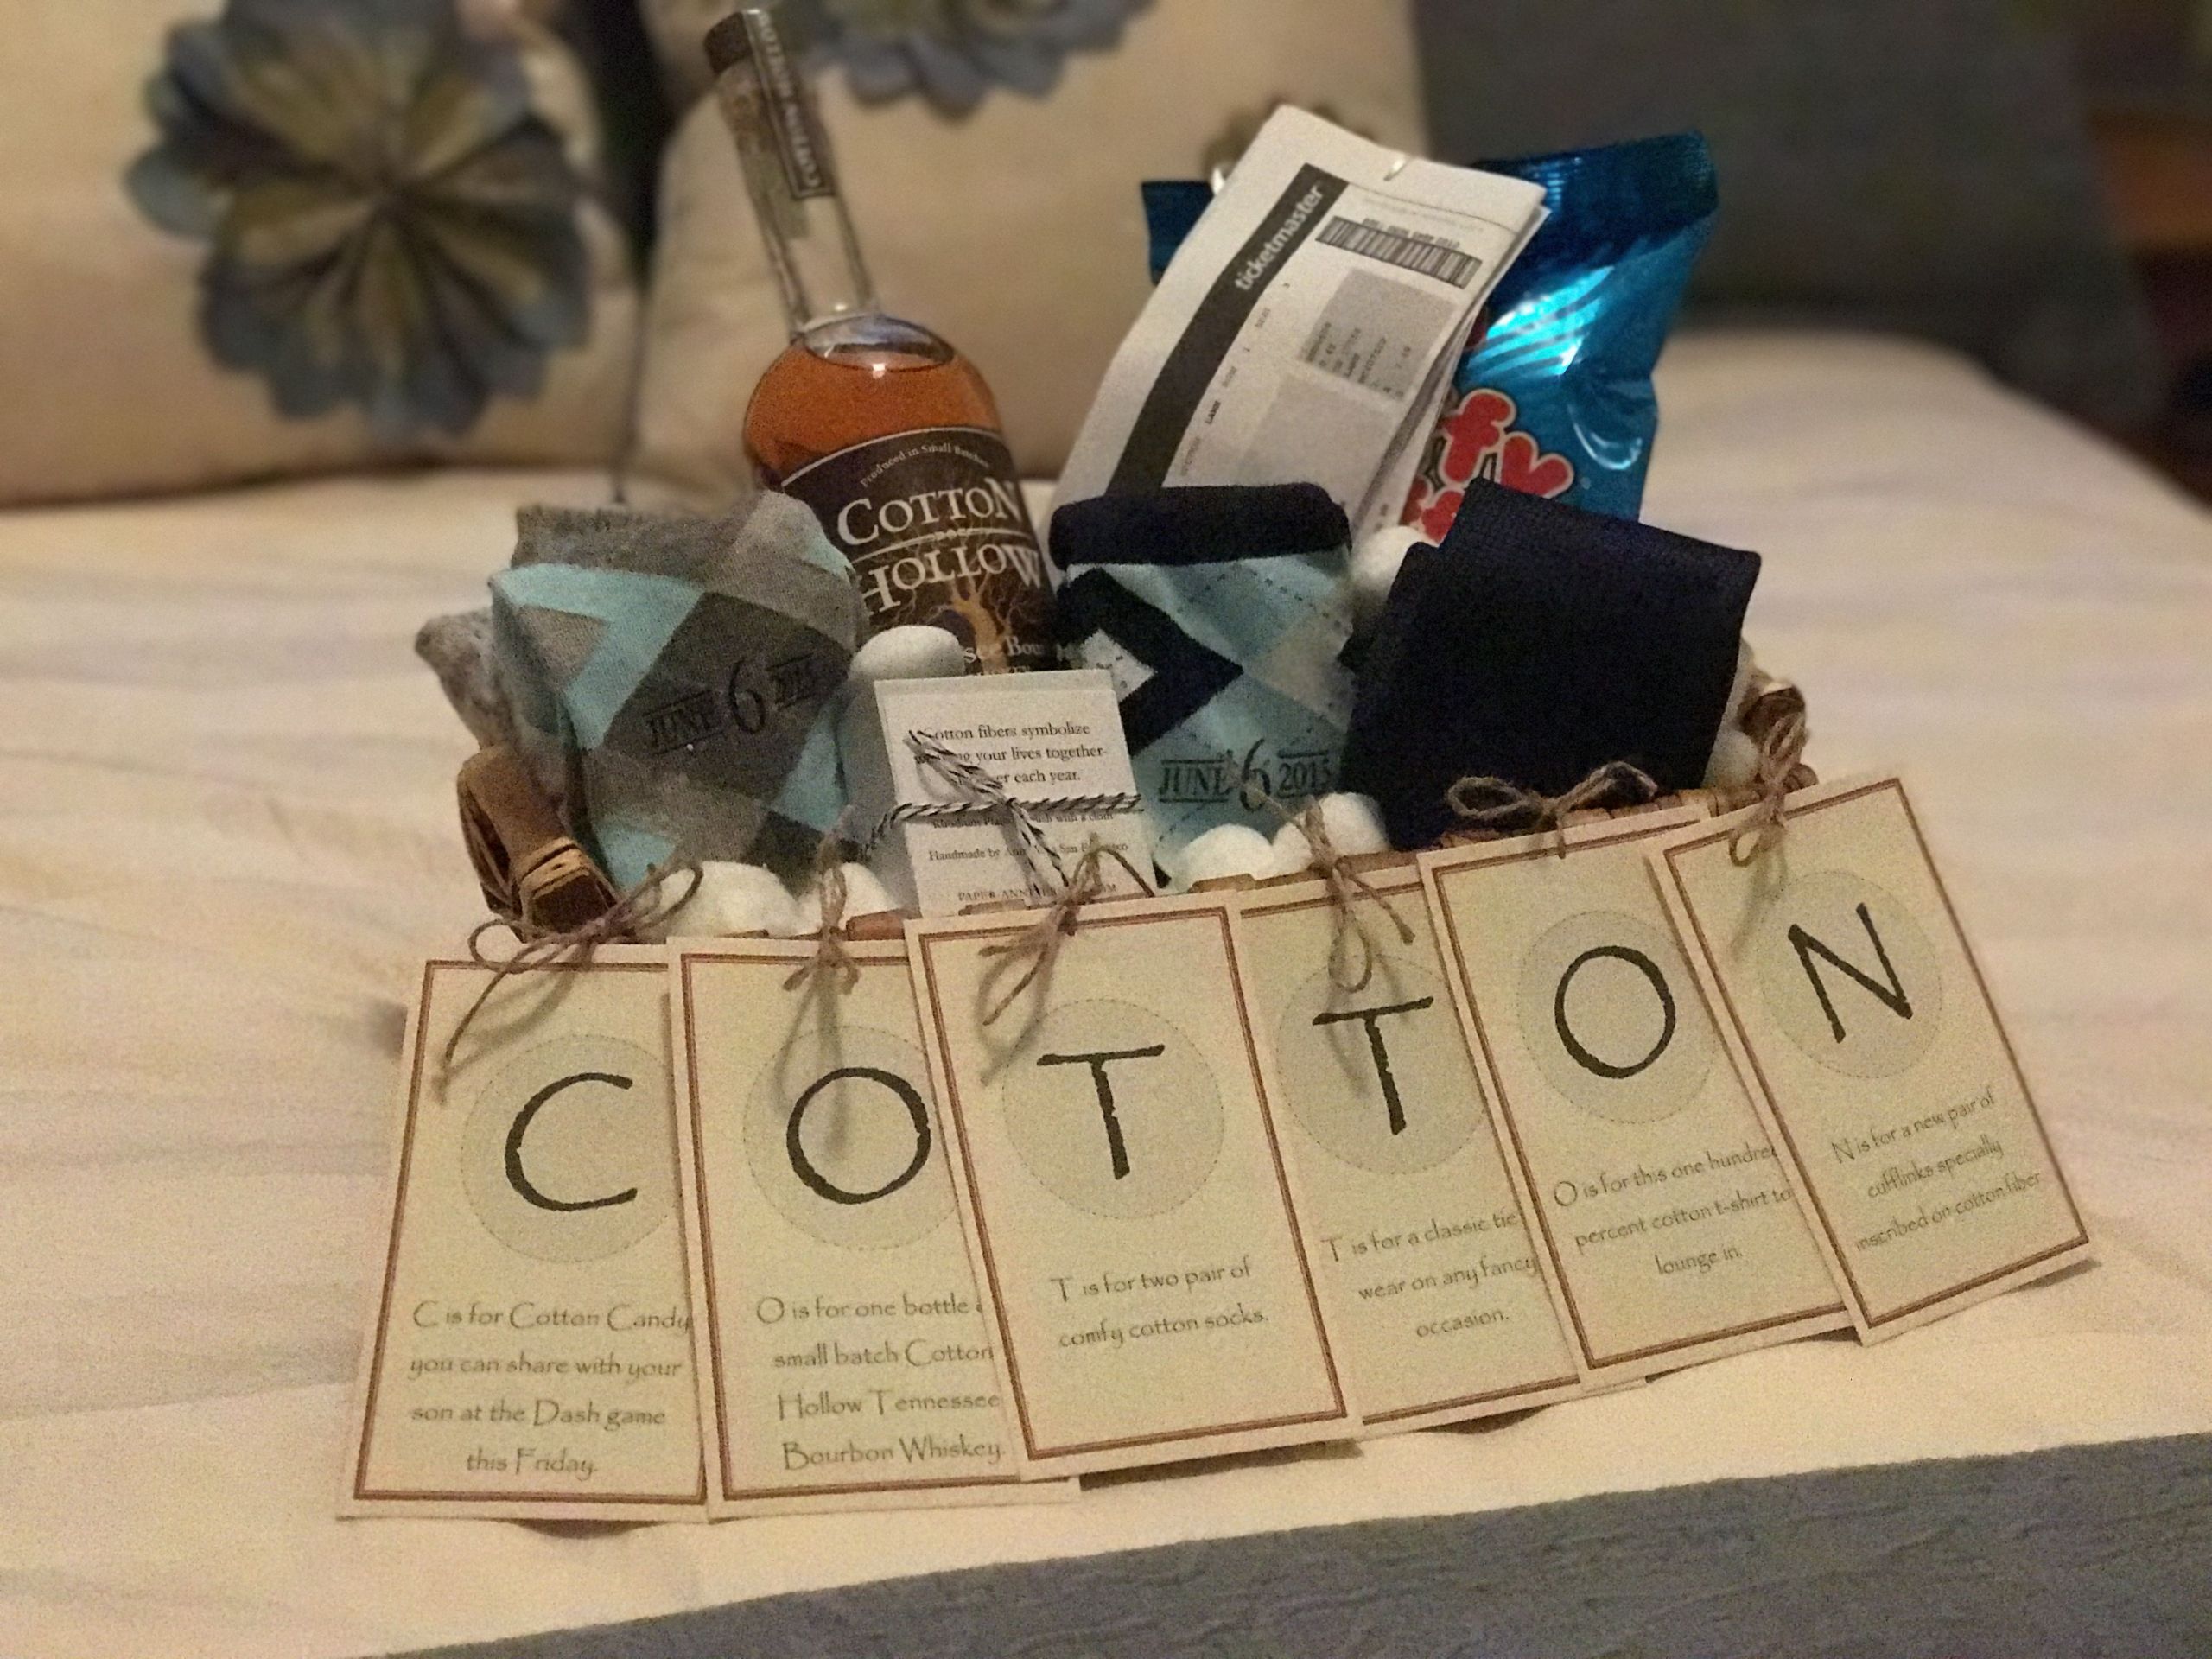 Second Wedding Anniversary Gift Ideas For Husband
 The "Cotton" Anniversary Gift for Him